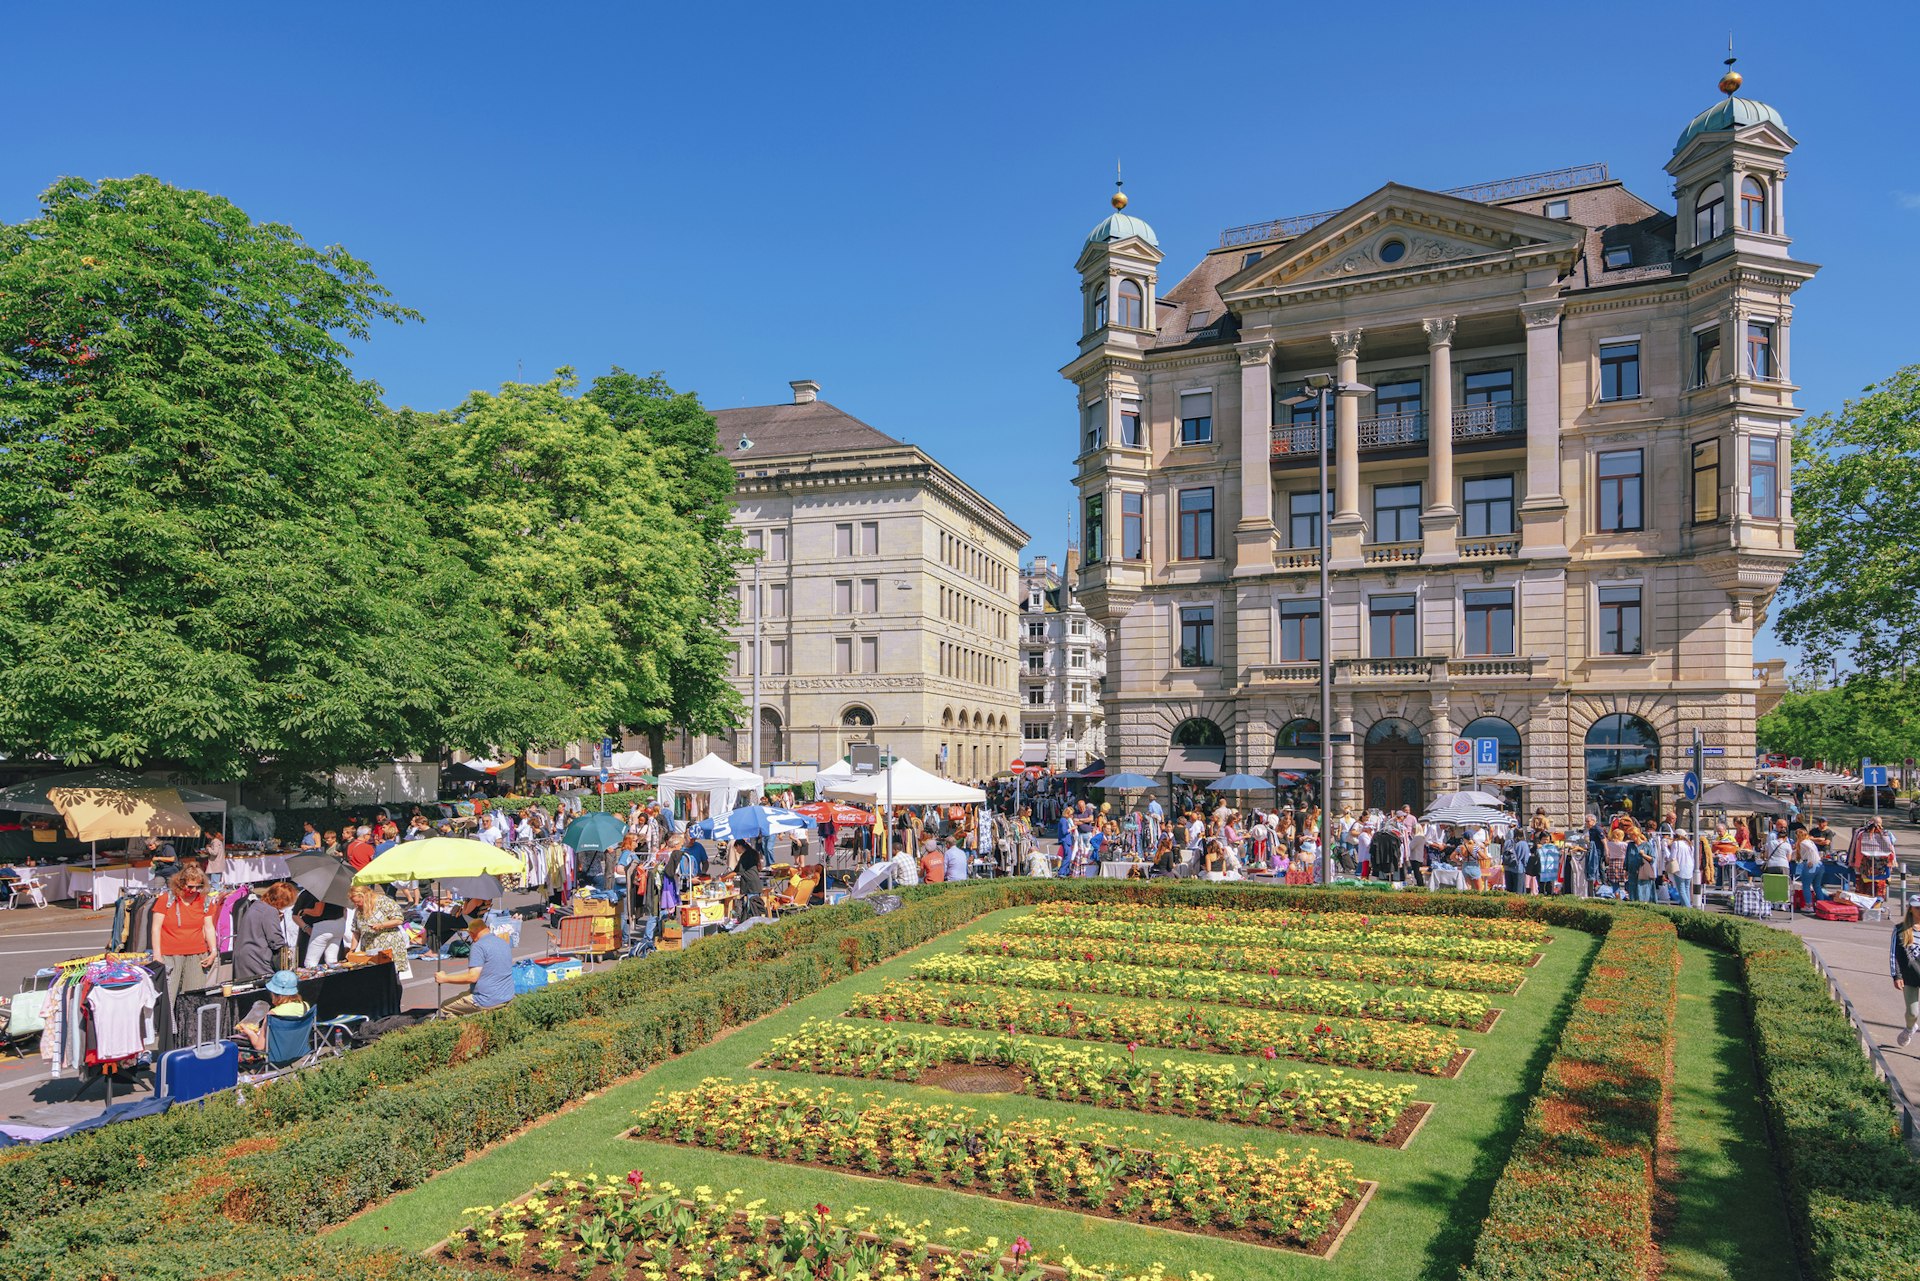 A neat flower garden in front of a grand building is surrounded by market stalls stocked with bric-a-brac for sale